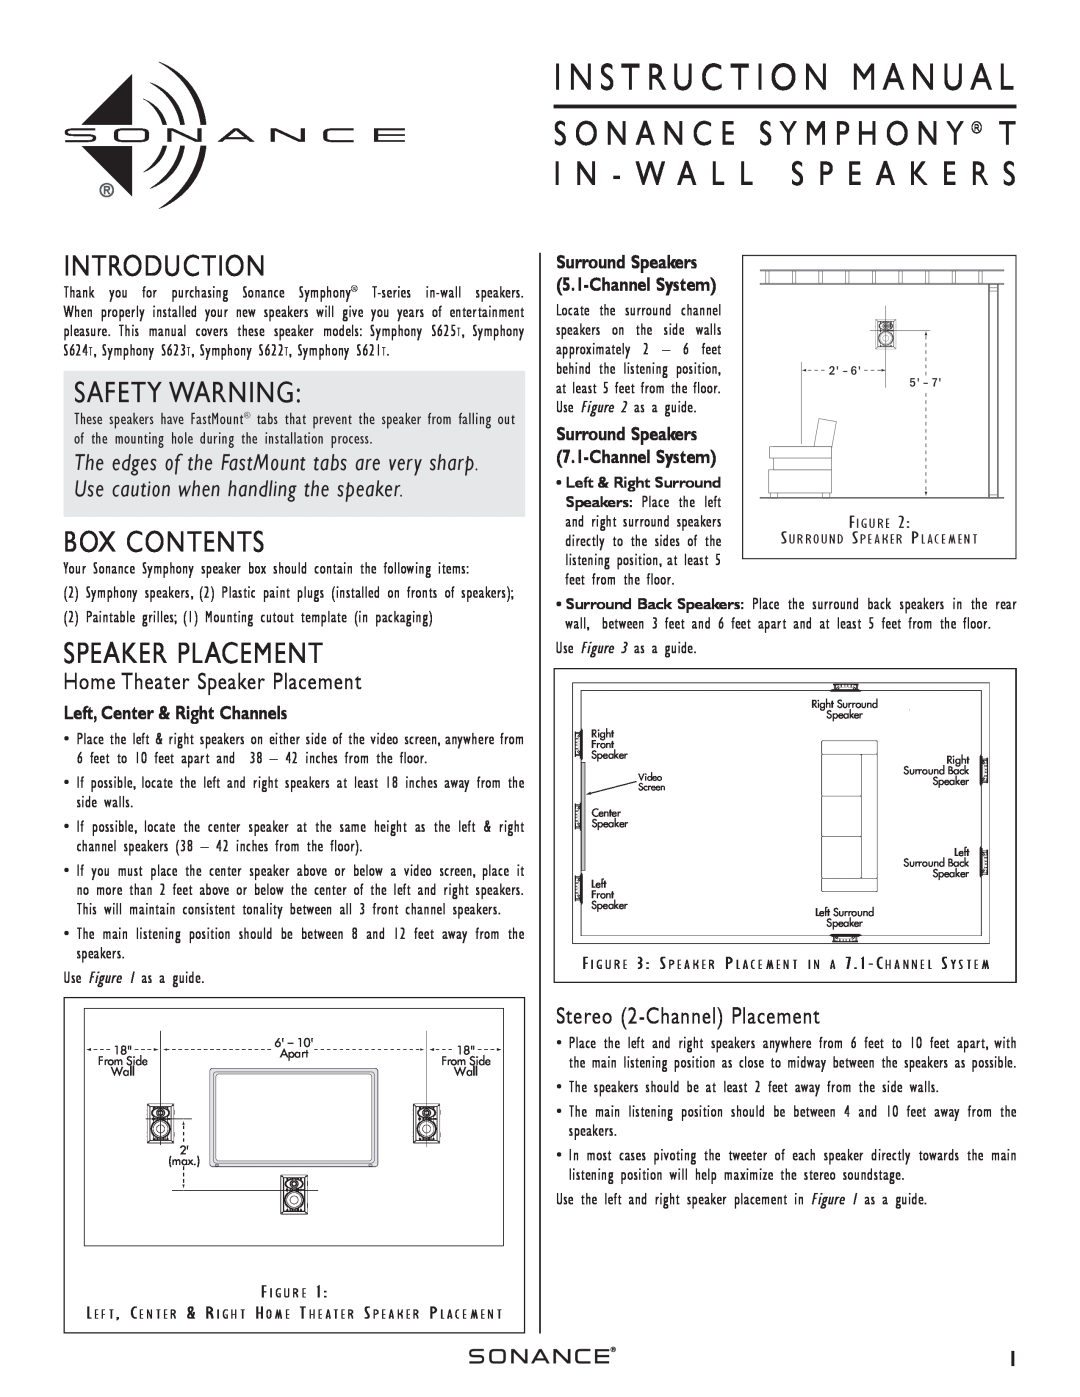 Sonance T-series instruction manual Introduction, Safety Warning, Box Contents, Speaker Placement 